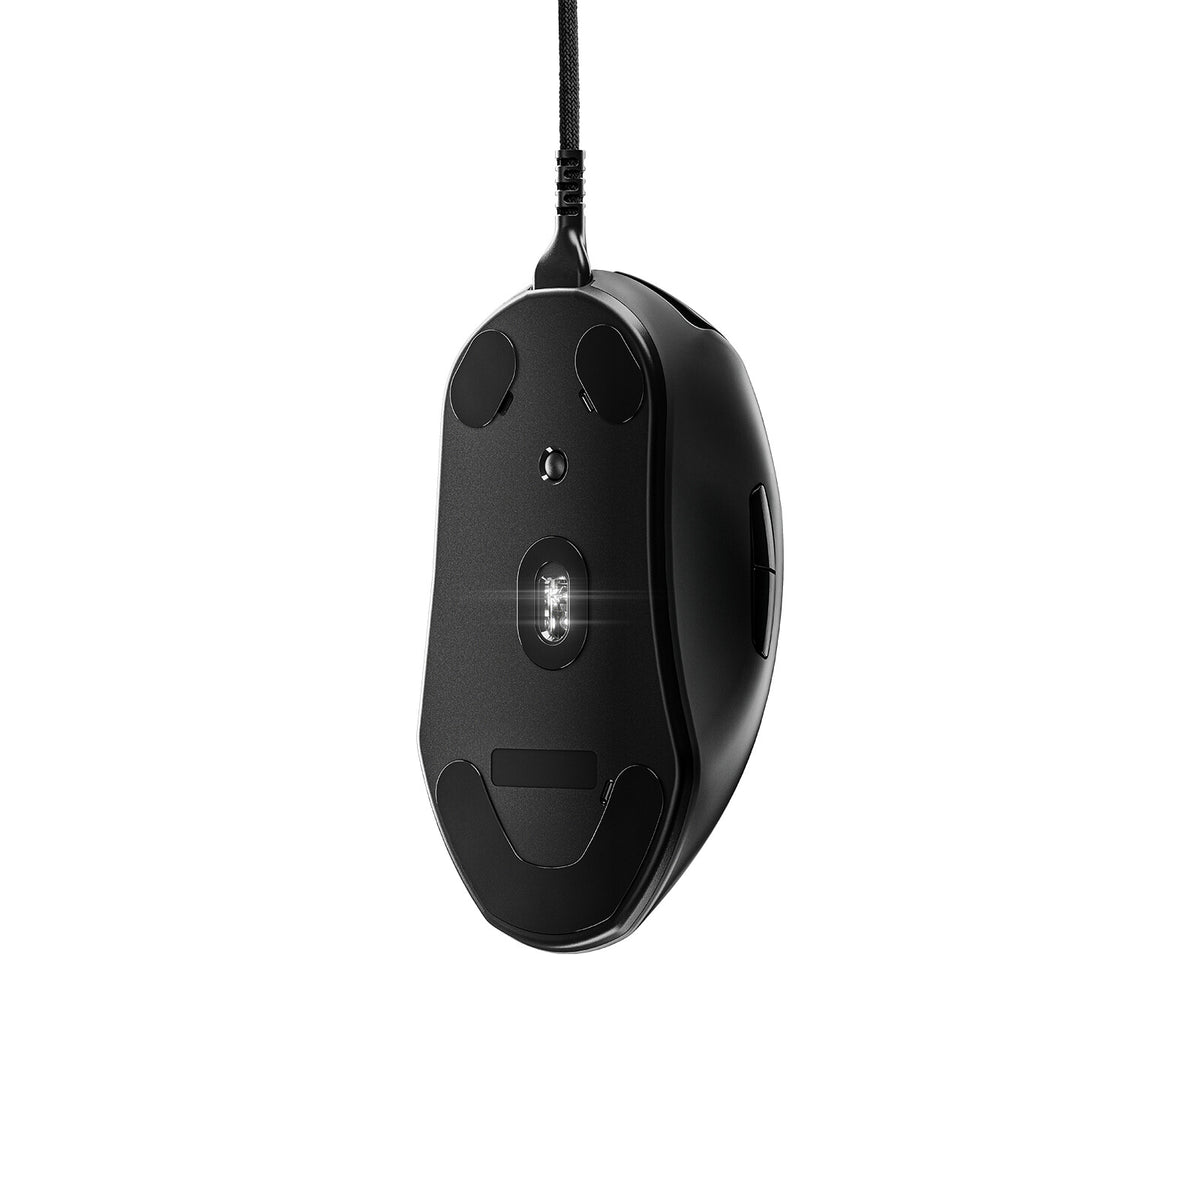 Steelseries Prime - Wired USB Type-A Optical Mouse - 18,000 DPI